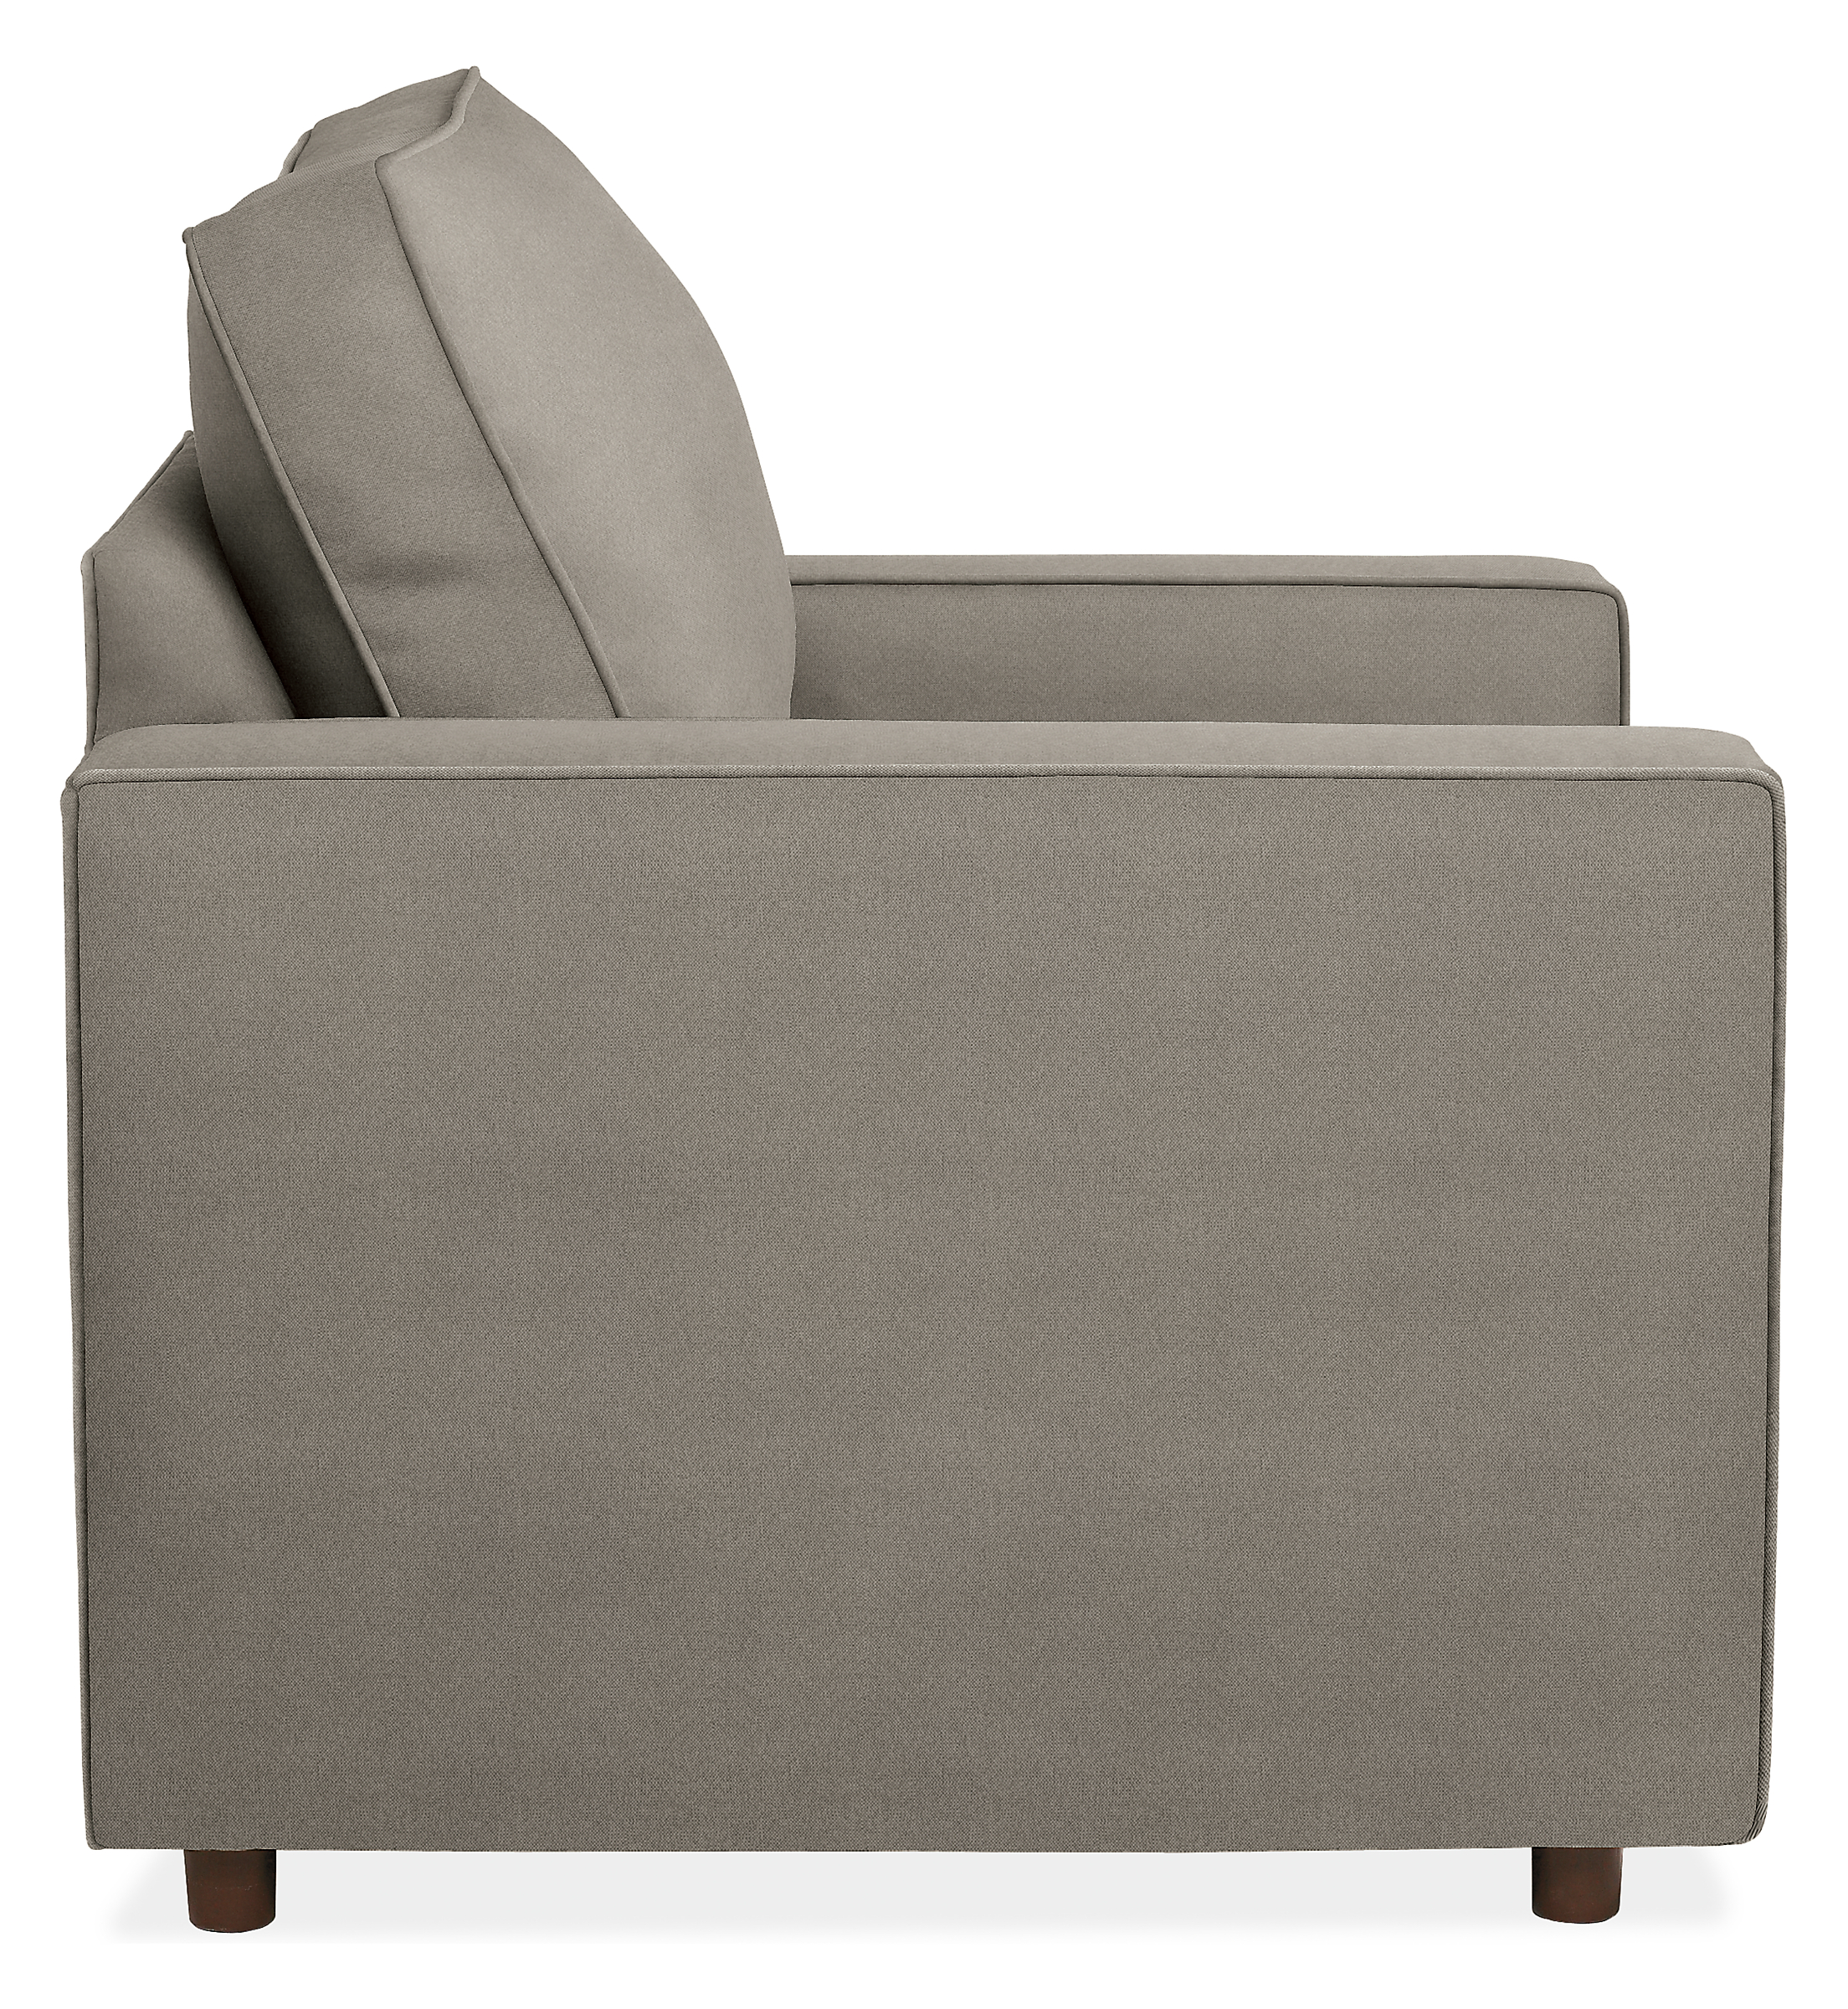 Side view of York chair in cement fabric.